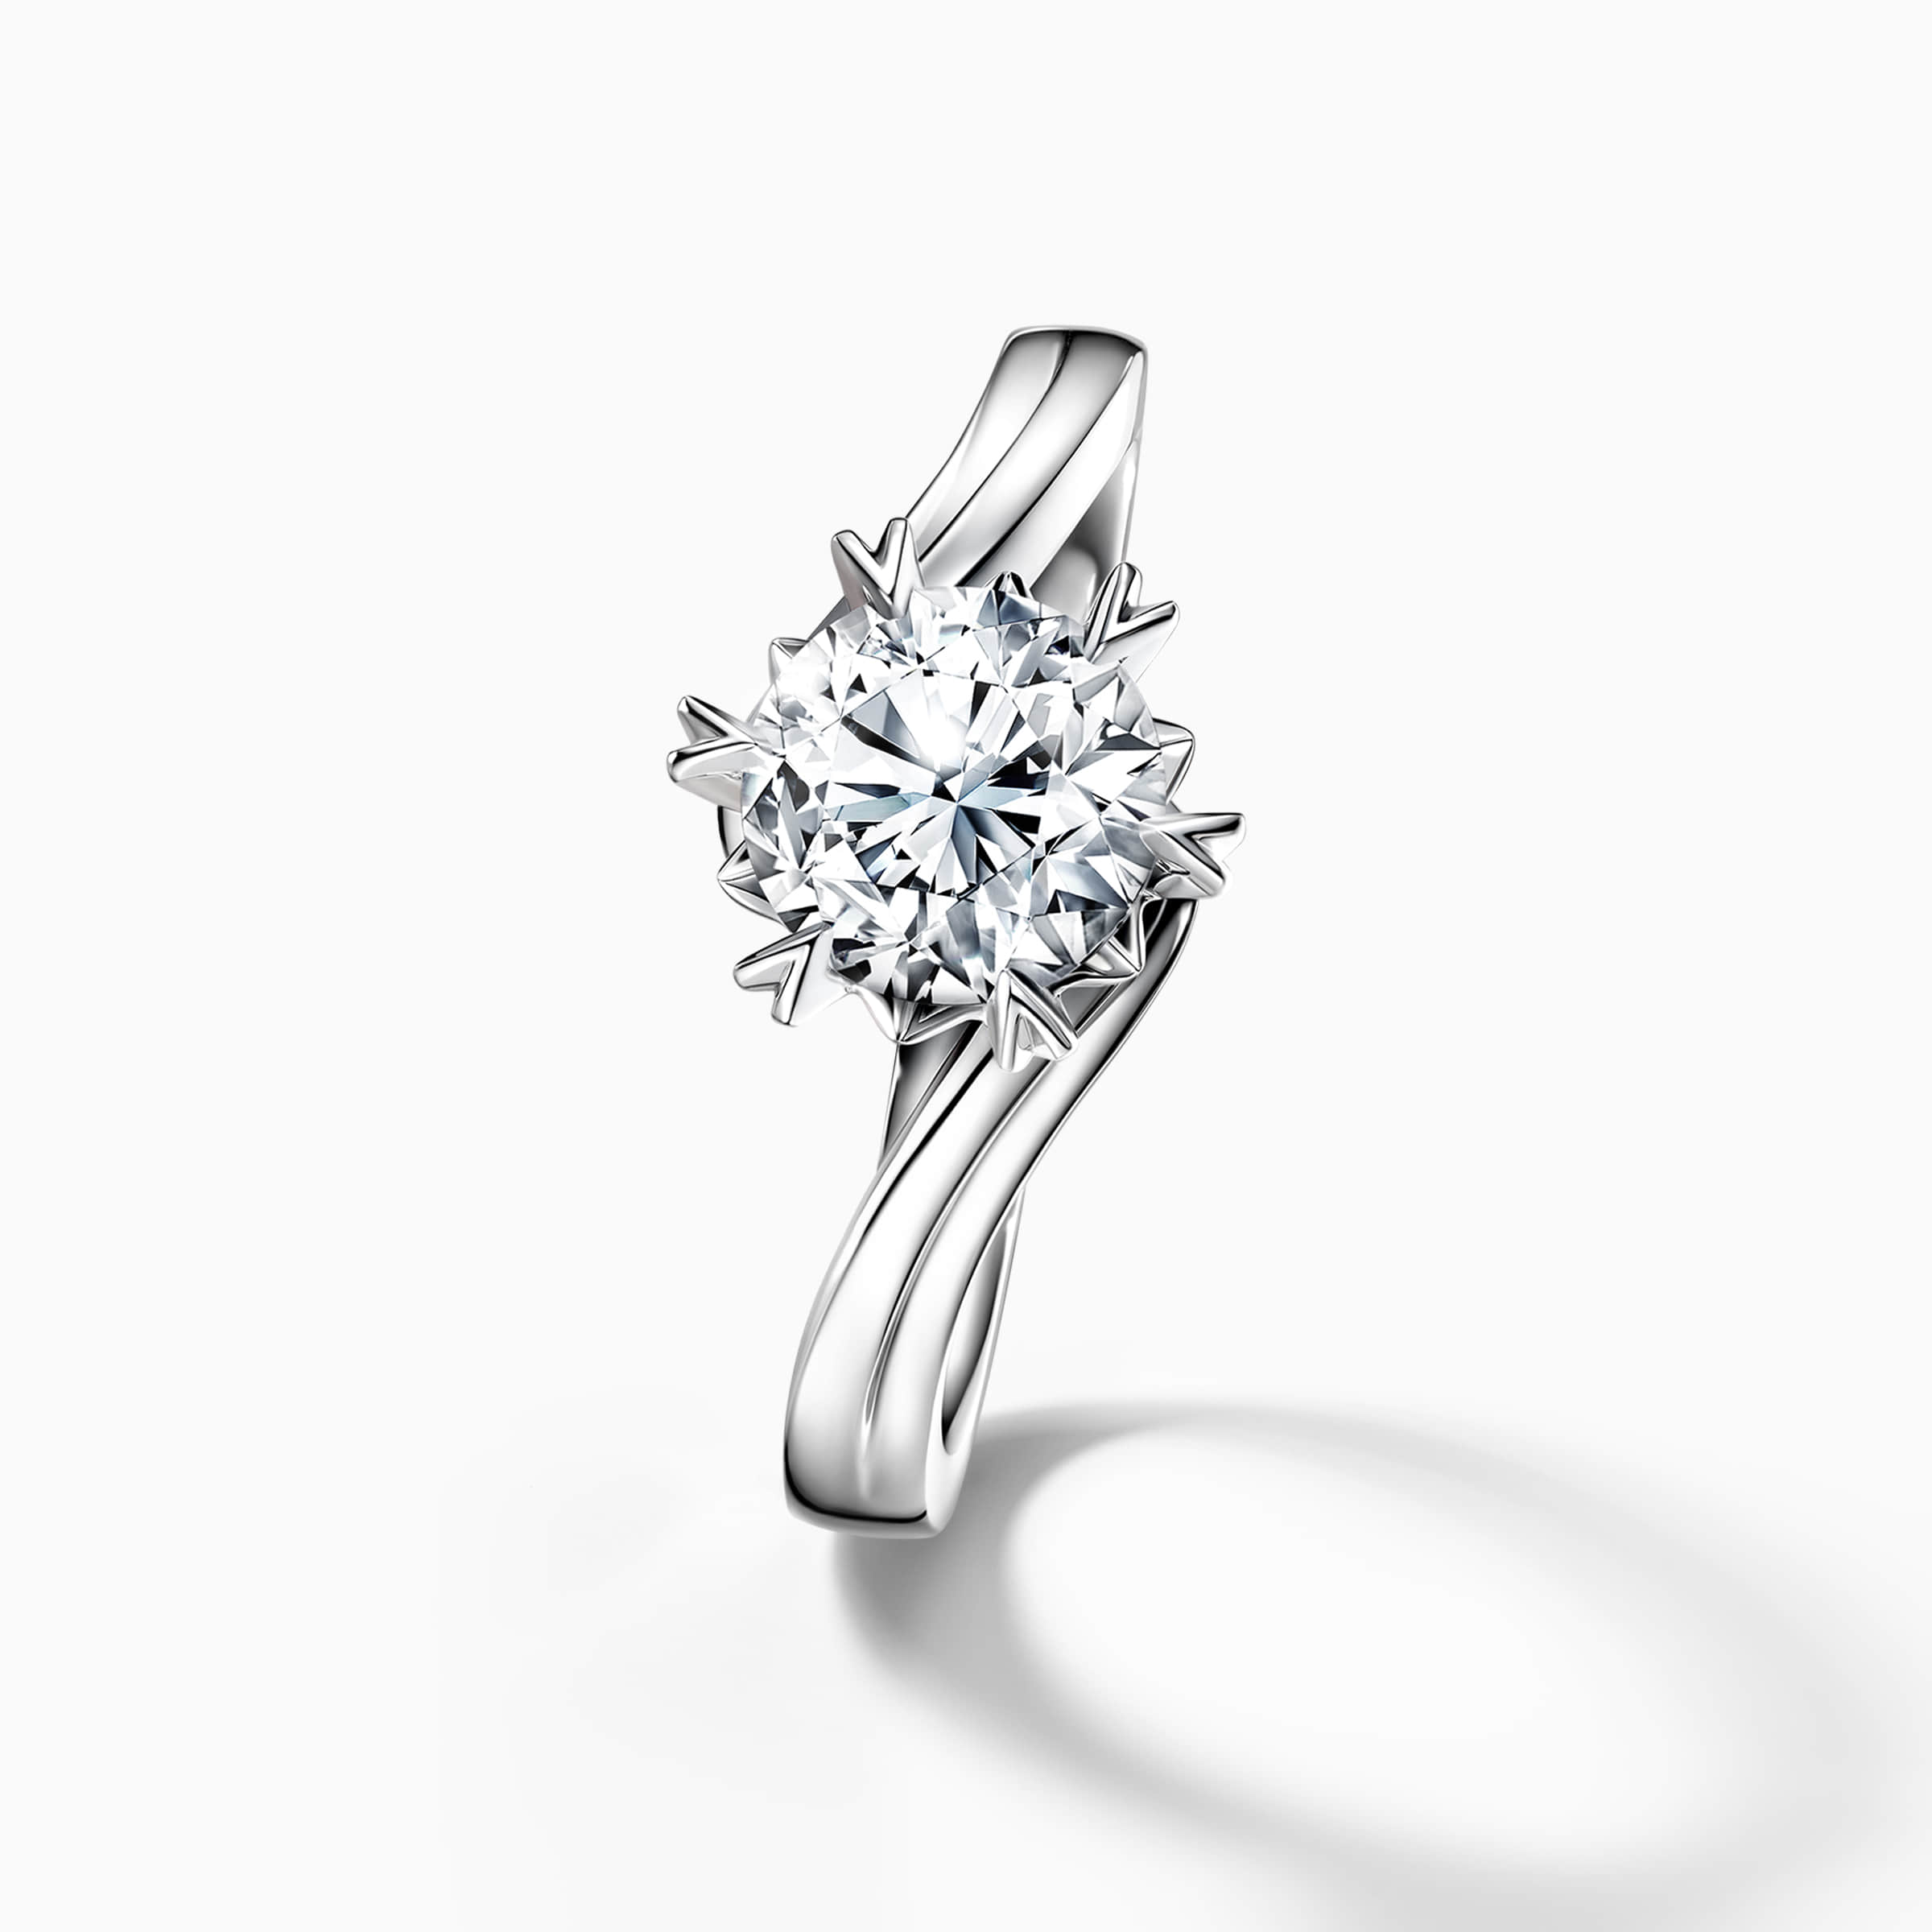 Darry Ring snowflake bypass engagement ring front view